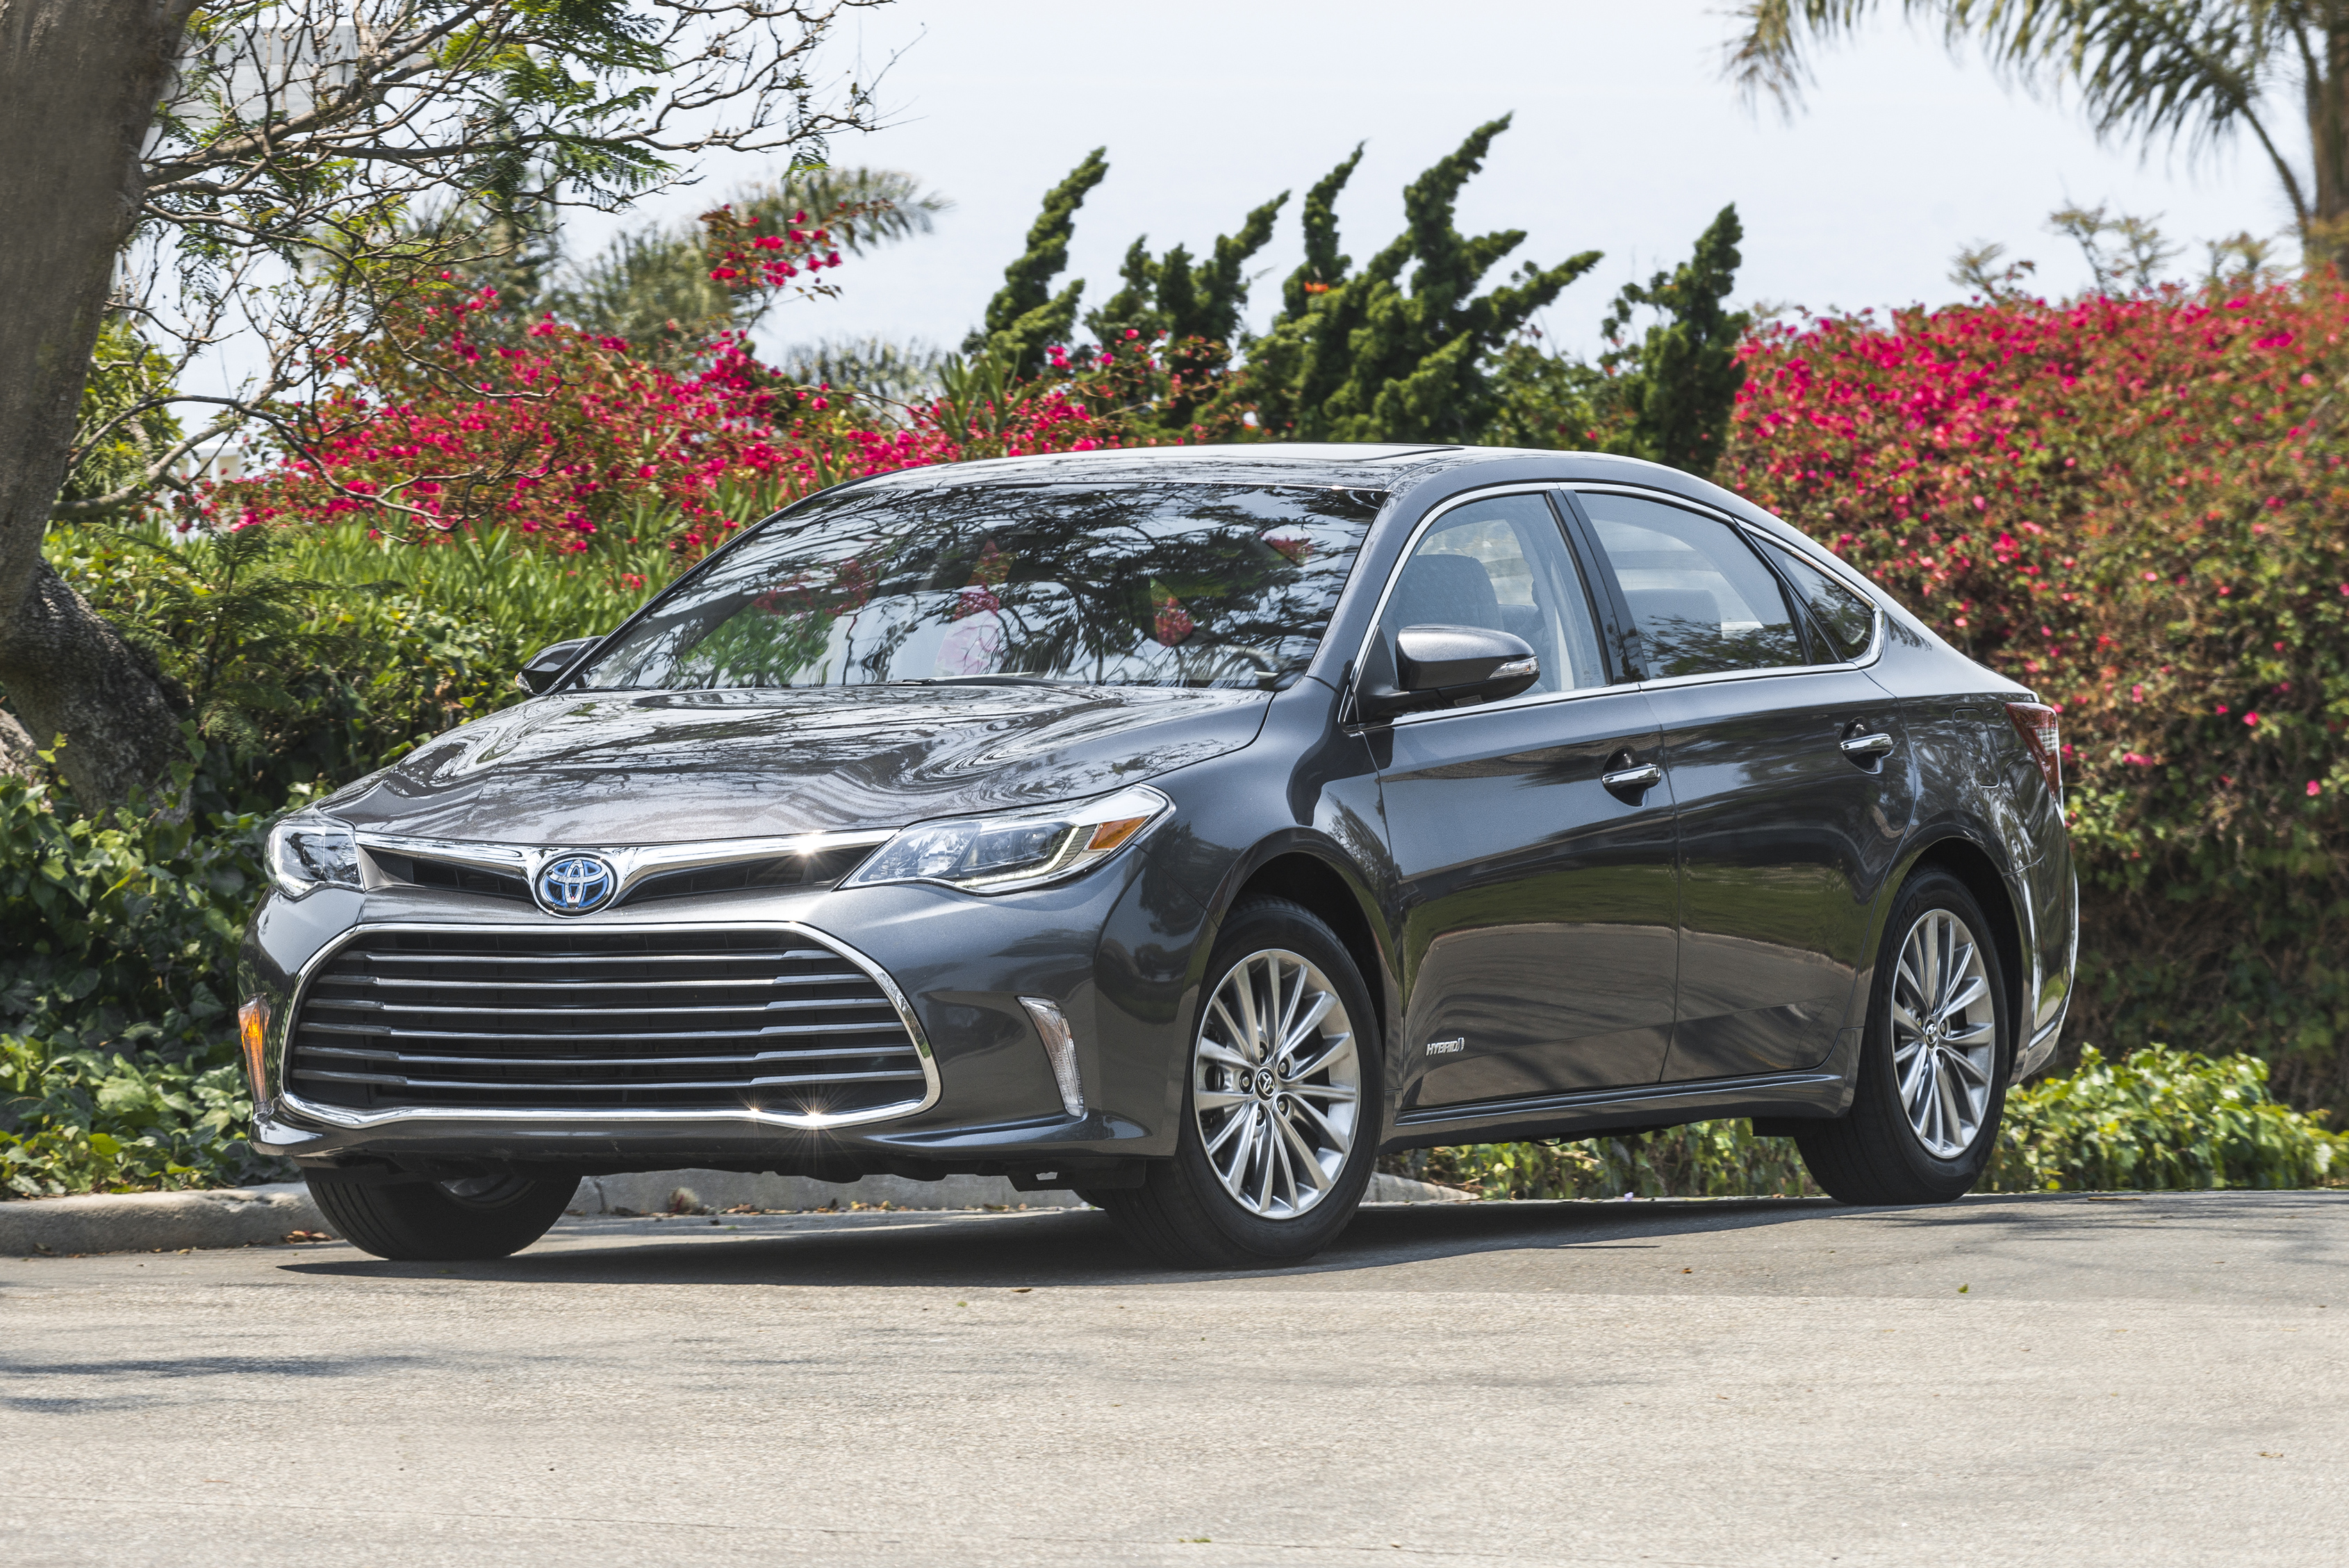 2018 Toyota Avalon Hybrid: A Smooth, Sumptuous, Efficient Sedan [Review] -  The Fast Lane Car